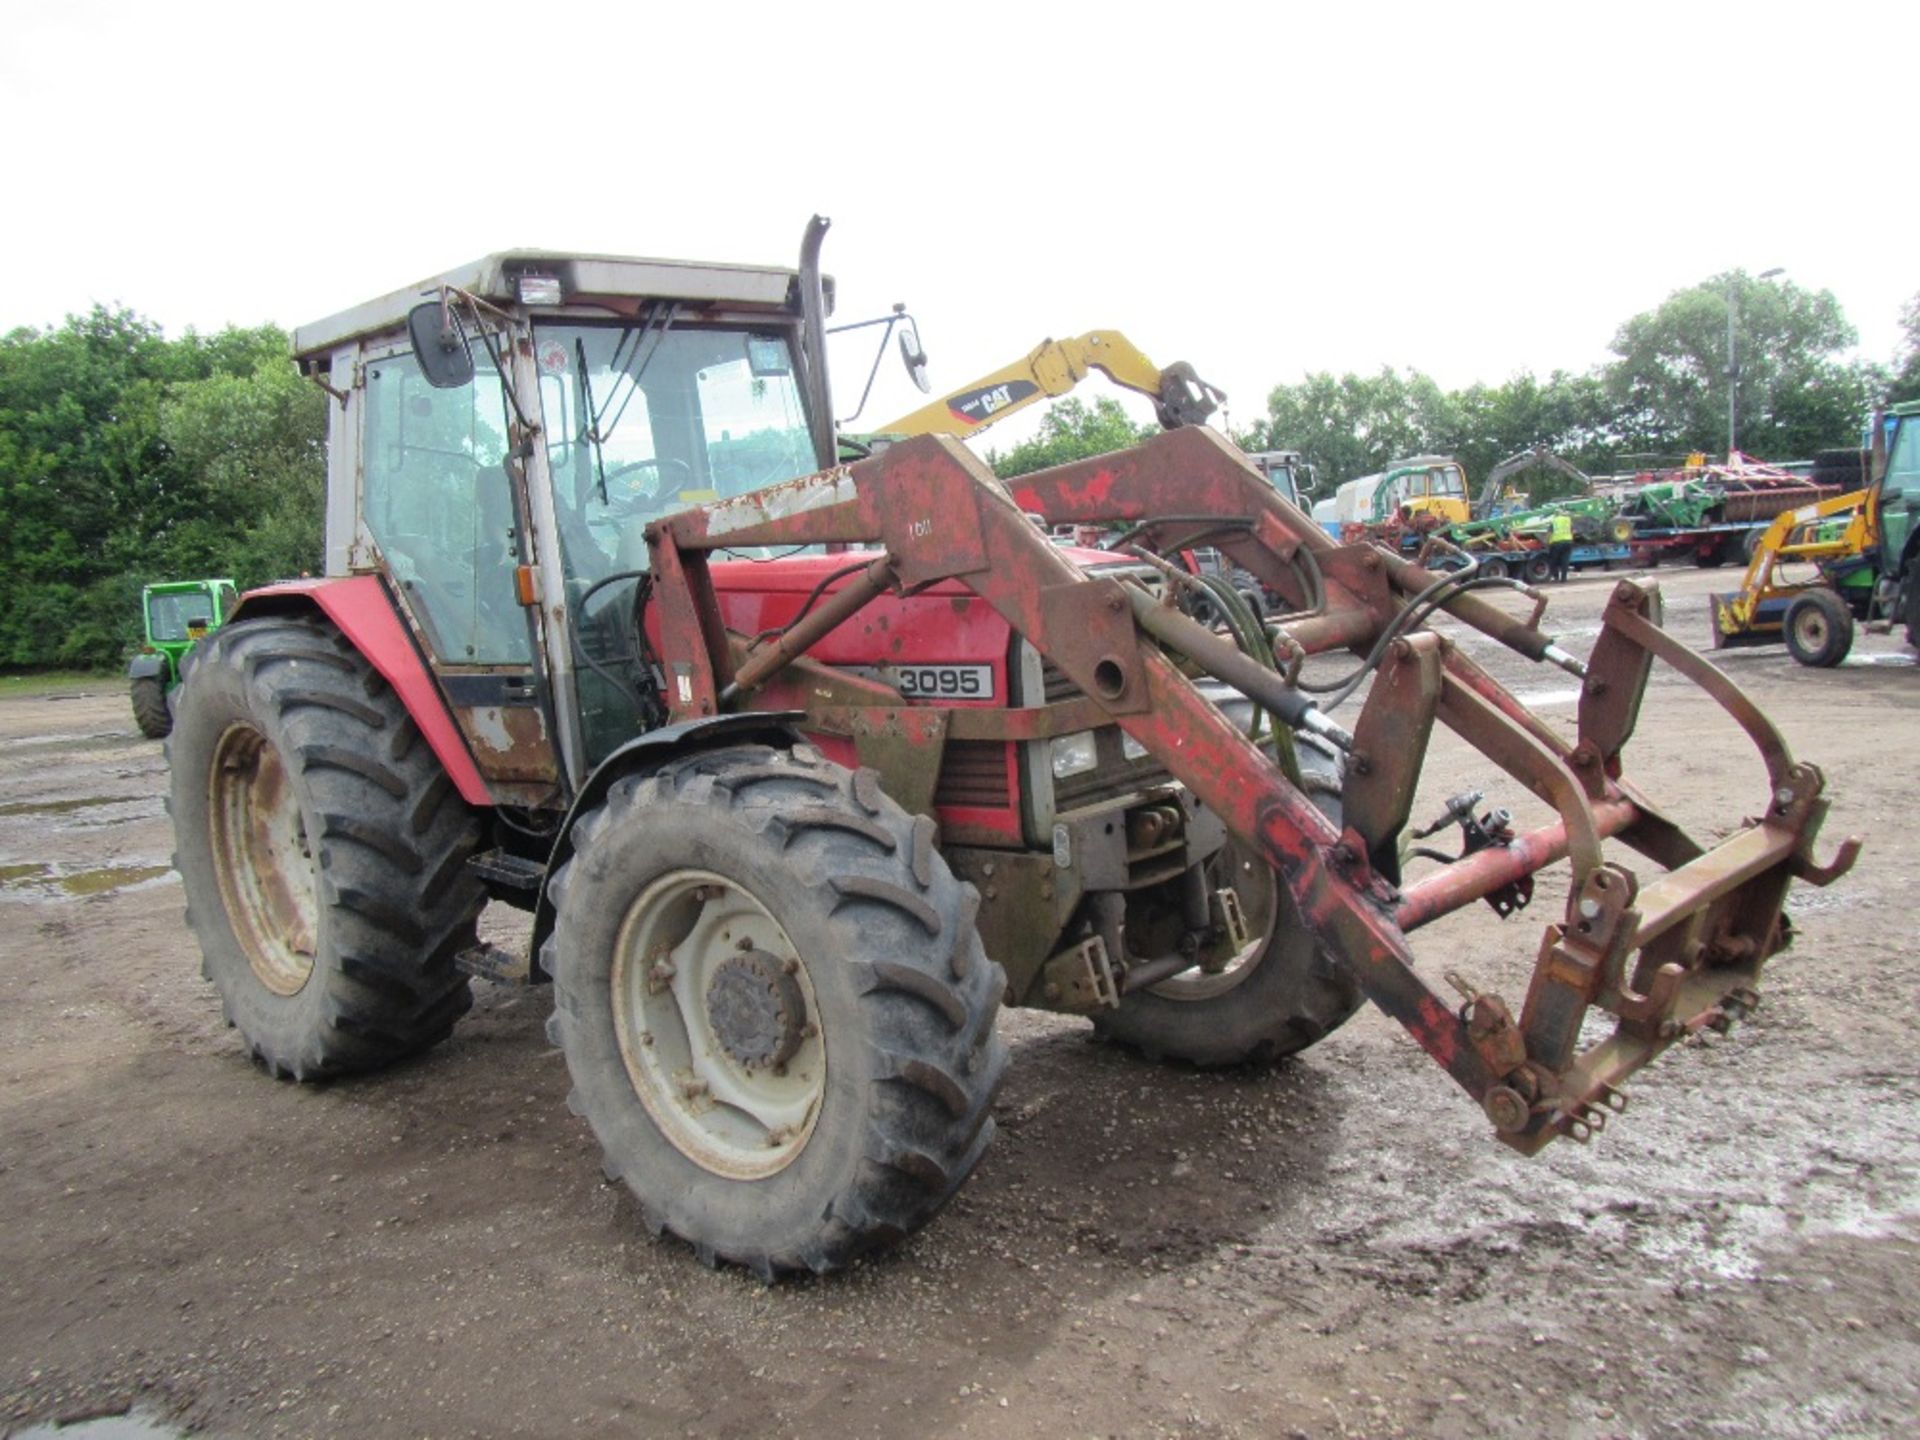 1994 Massey Ferguson 3090 4wd Tractor with Front Loader. Reg. No. M317 OCW Ser No C201010 - Image 4 of 18